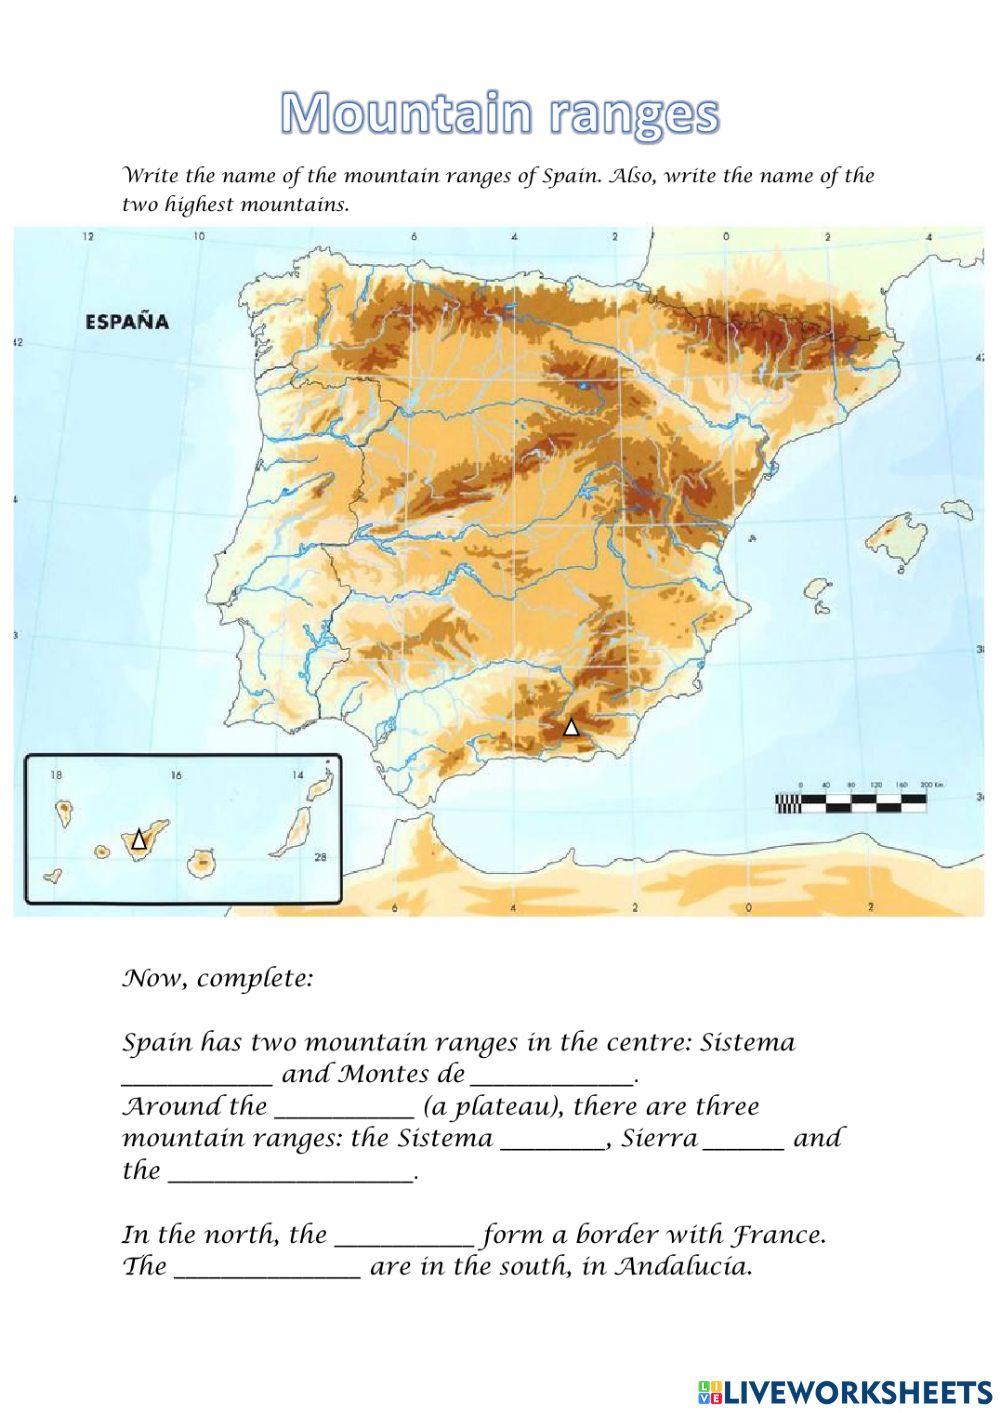 Mountain ranges from spain